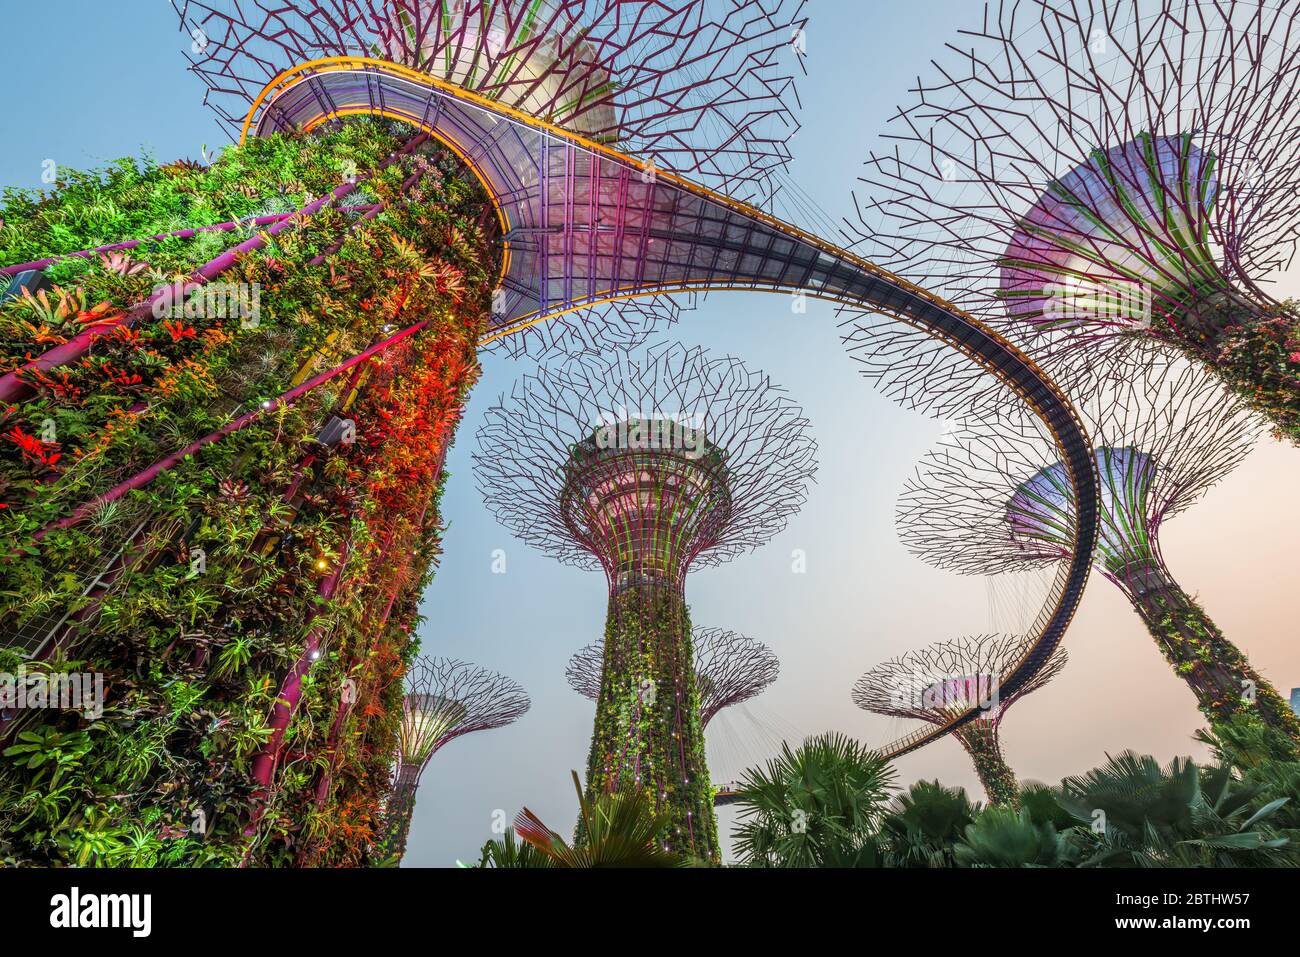 SINGAPORE - SEPTEMBER 5, 2015: Supertrees at Gardens by the Bay. The tree-like structures are fitted with environmental technologies that mimic the ec Stock Photo